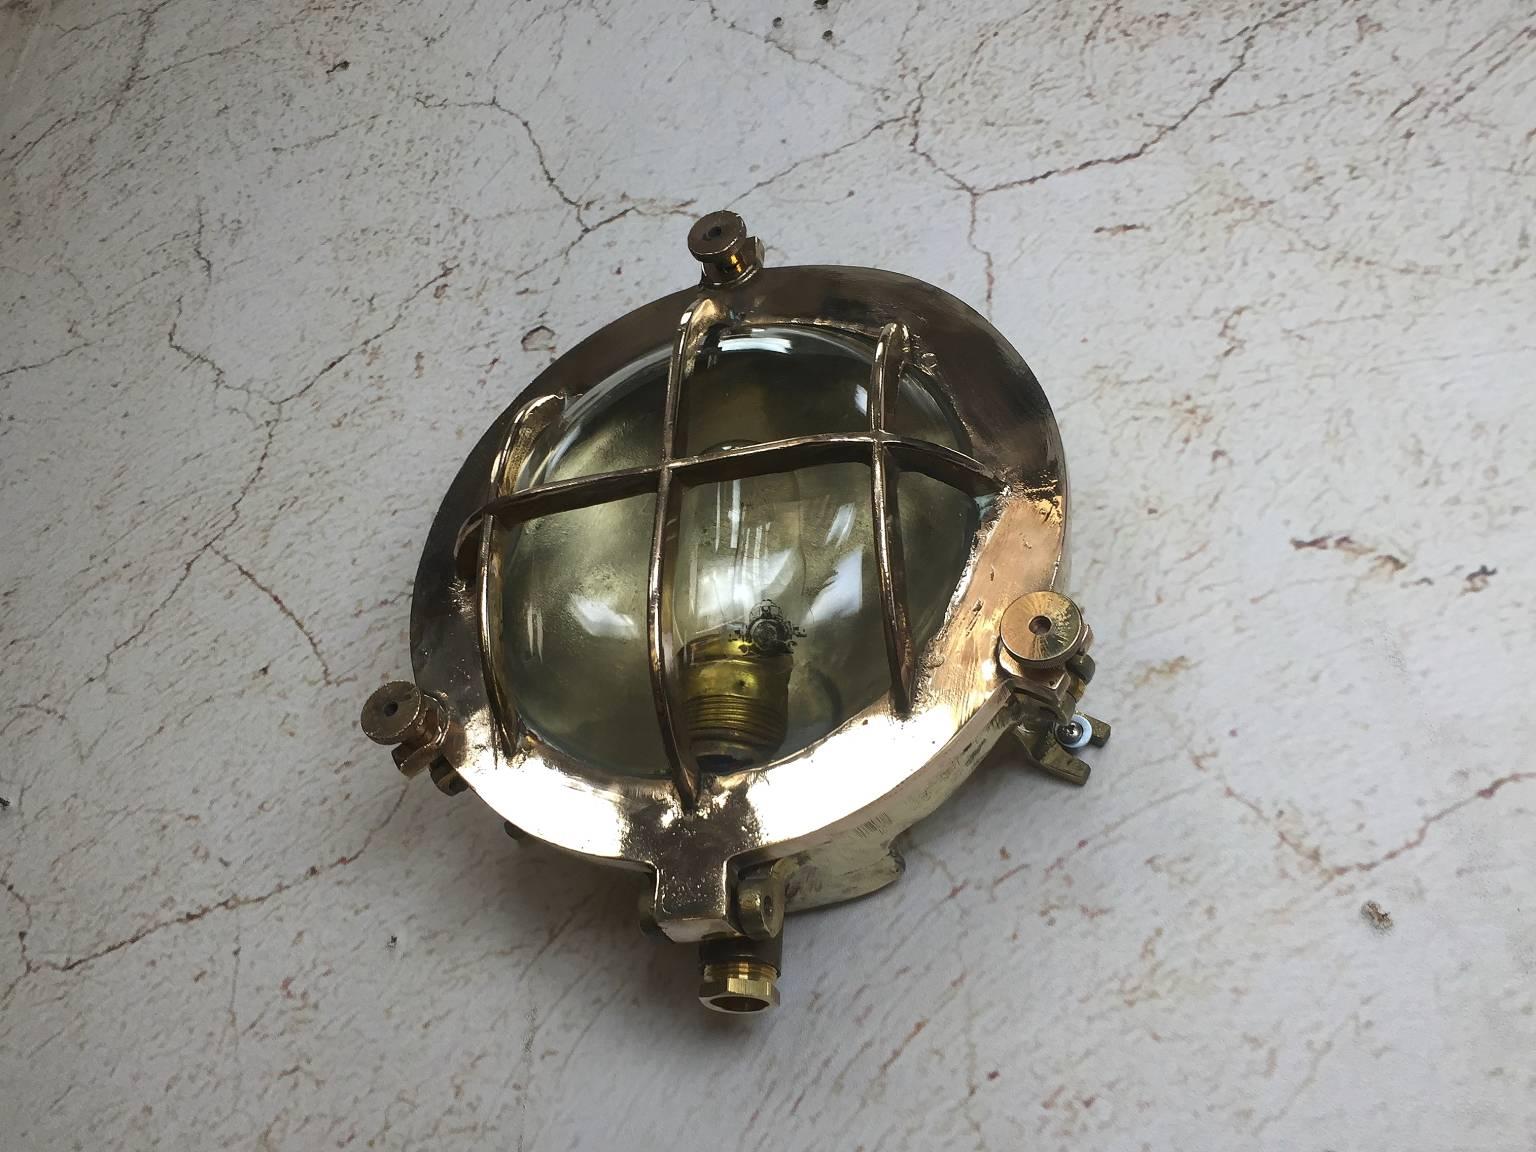 German made circa 1970.

Very heavy cast fittings made for super tankers and cargo ships.

The caged front is the bronze section and the body is brass cast.

These lights have great presence and are a real statement in their